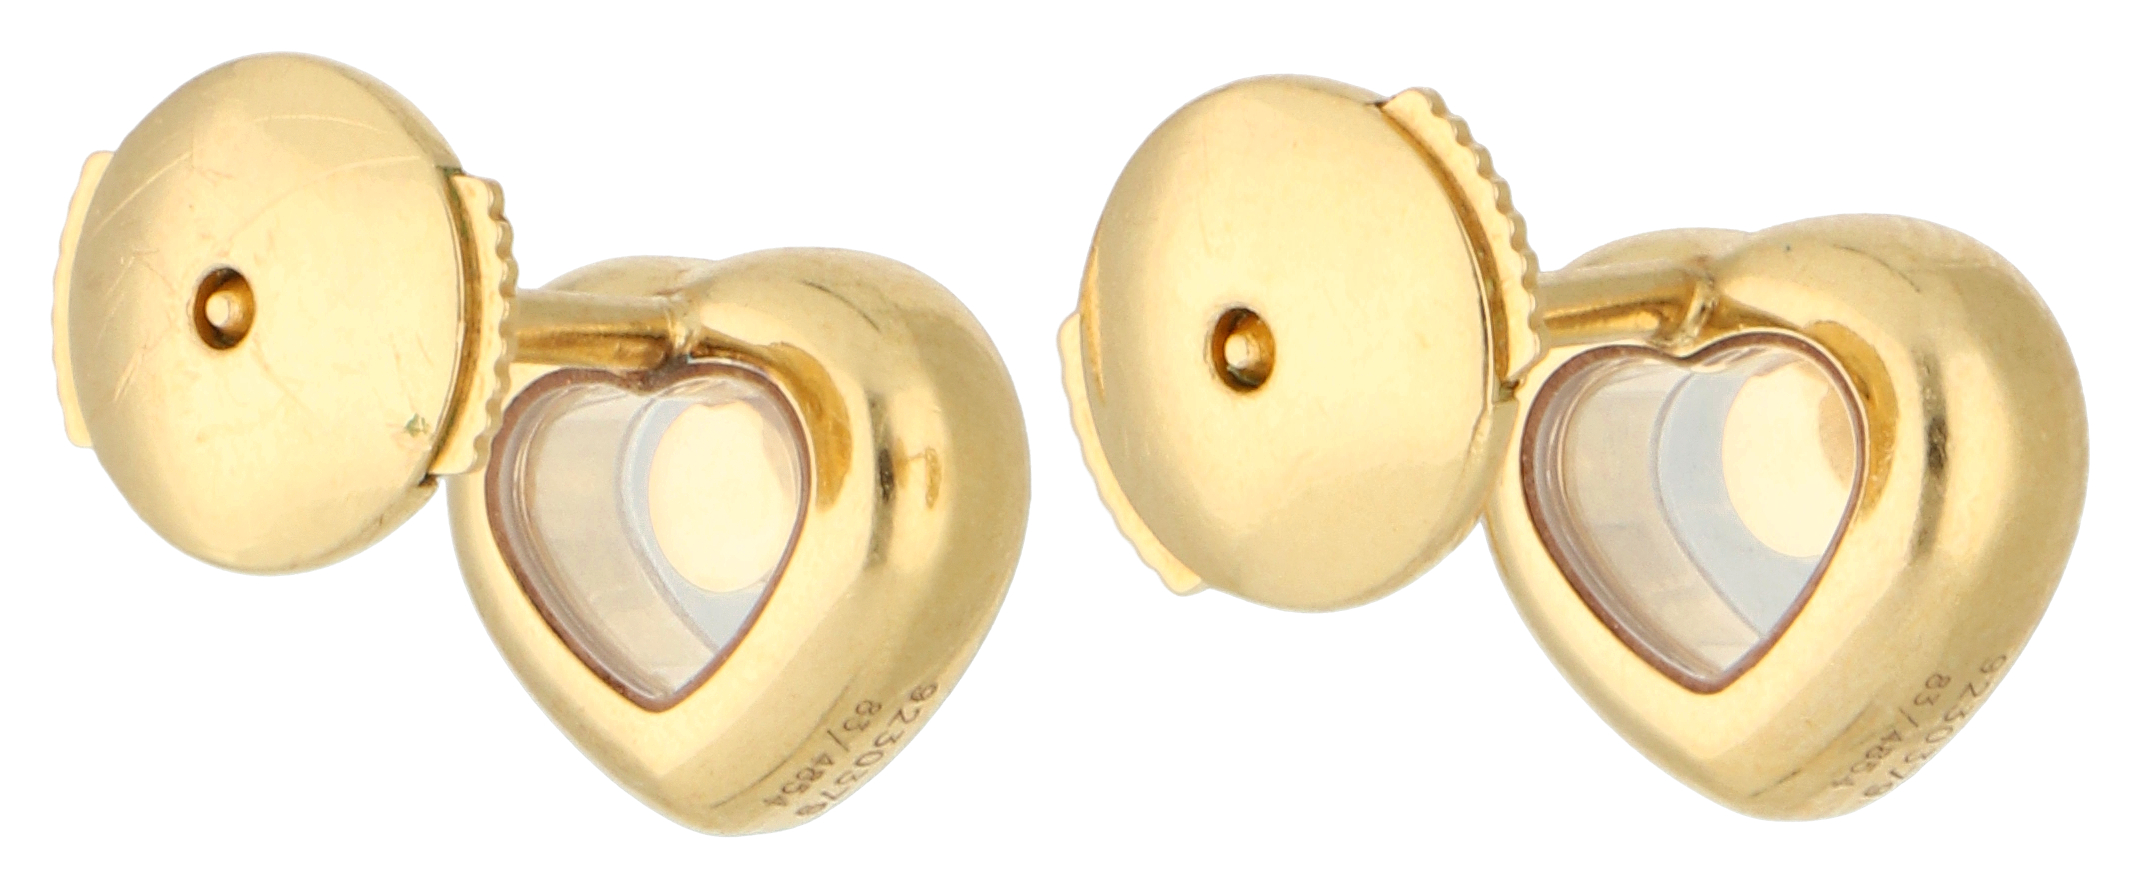 No Reserve - Chopard 18K yellow gold Happy Diamonds stud earrings set with approx. 0.11 ct. diamonds - Image 2 of 7